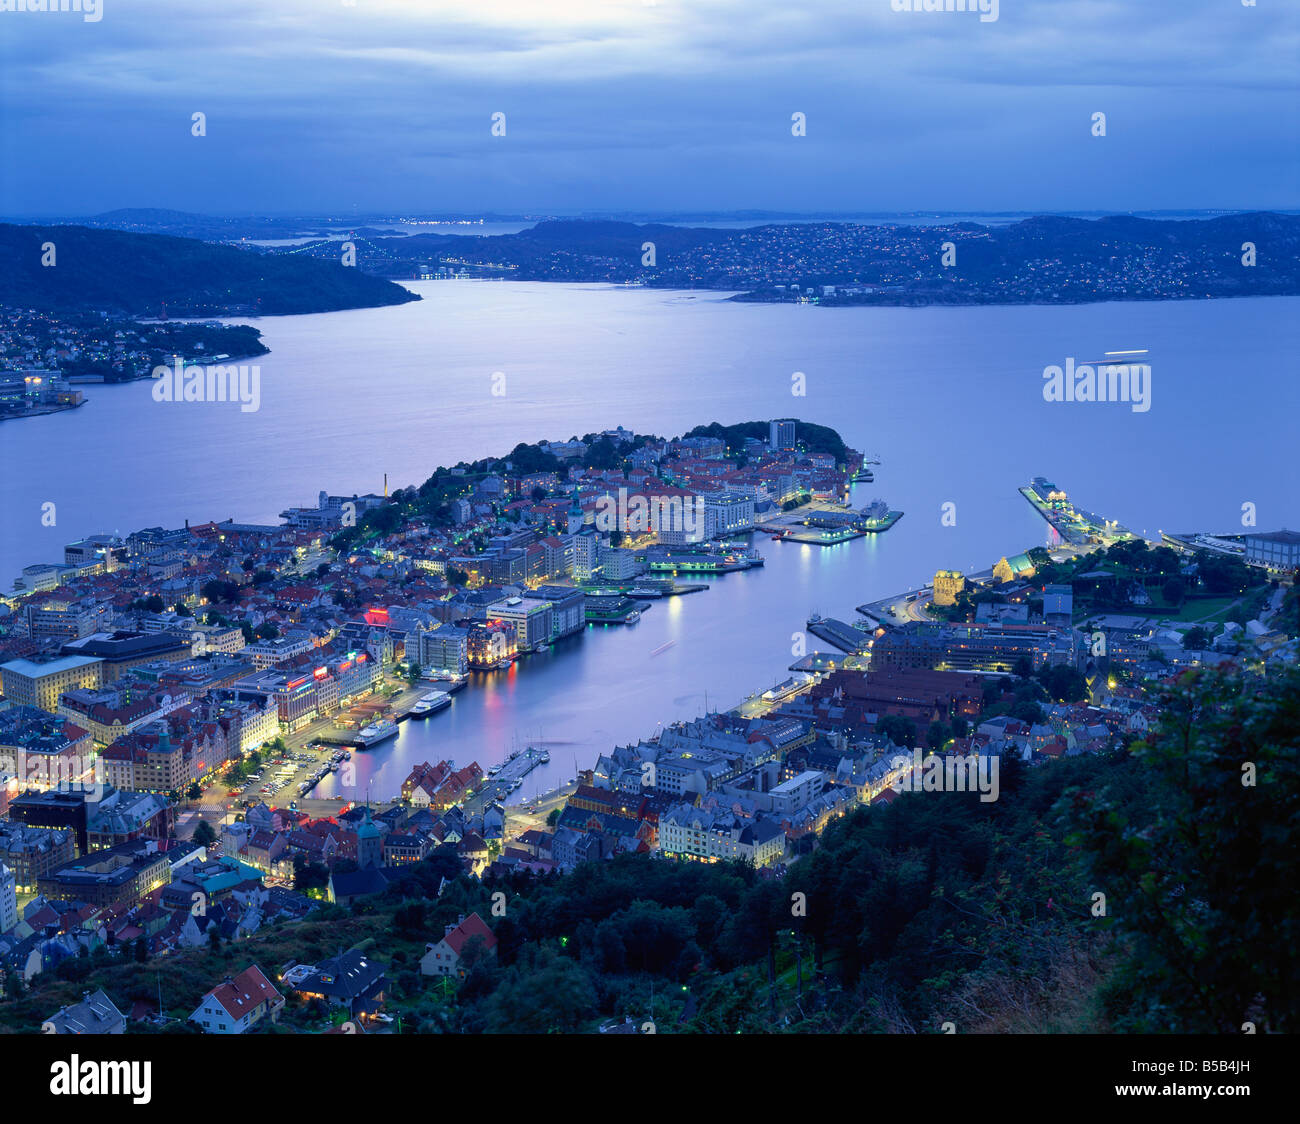 Aerial view the harbour and city of Bergen at dusk Norway Scandinavia Europe Stock Photo